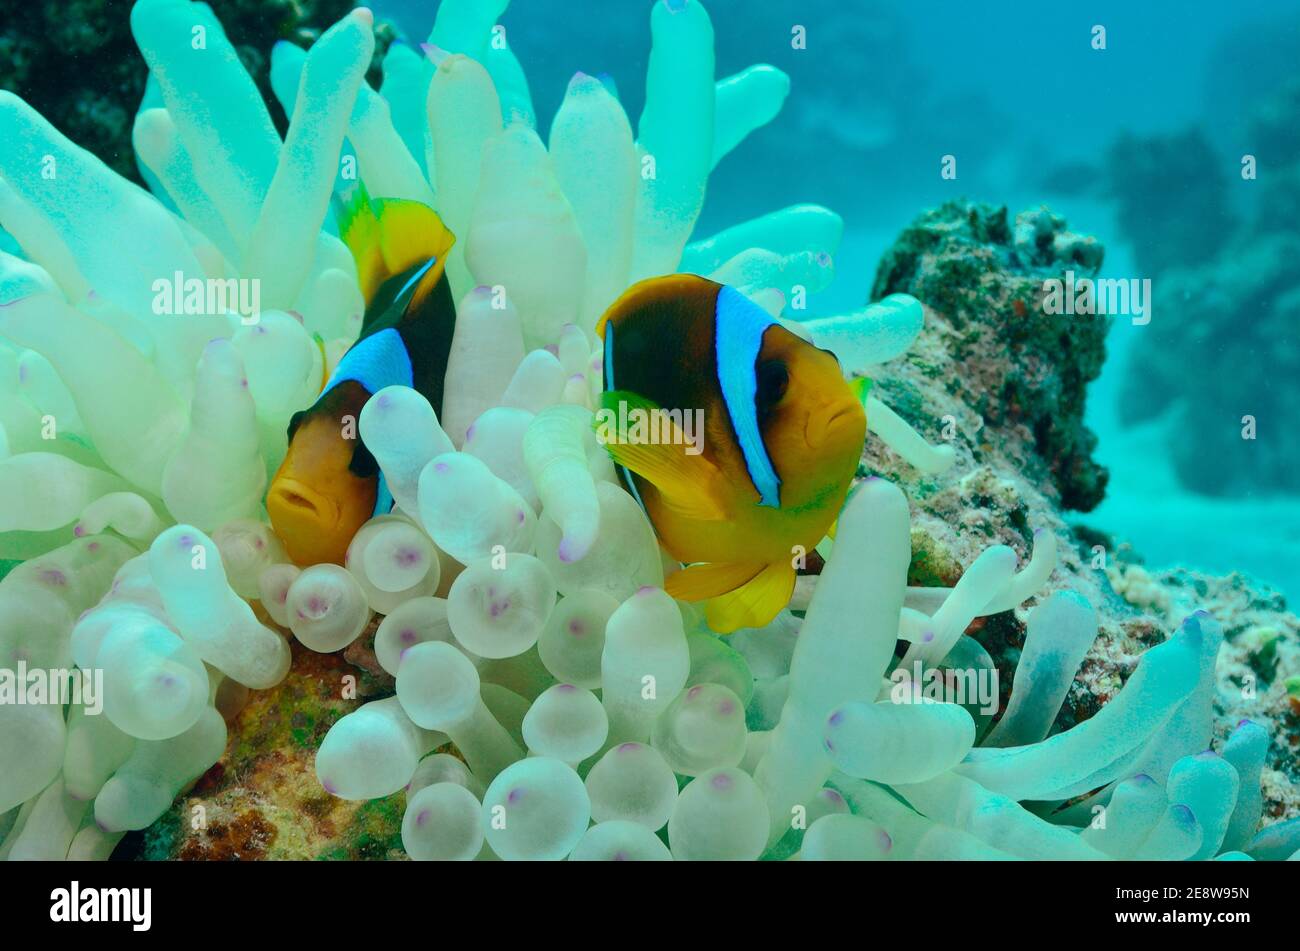 Amphiprion bicinctus, red sea anemonefish, red sea clownfish, Rotmeer-Anemonenfisch, Utopia Beach, Red Sea, Egypt, Rotes Meer, Ägypten Stock Photo